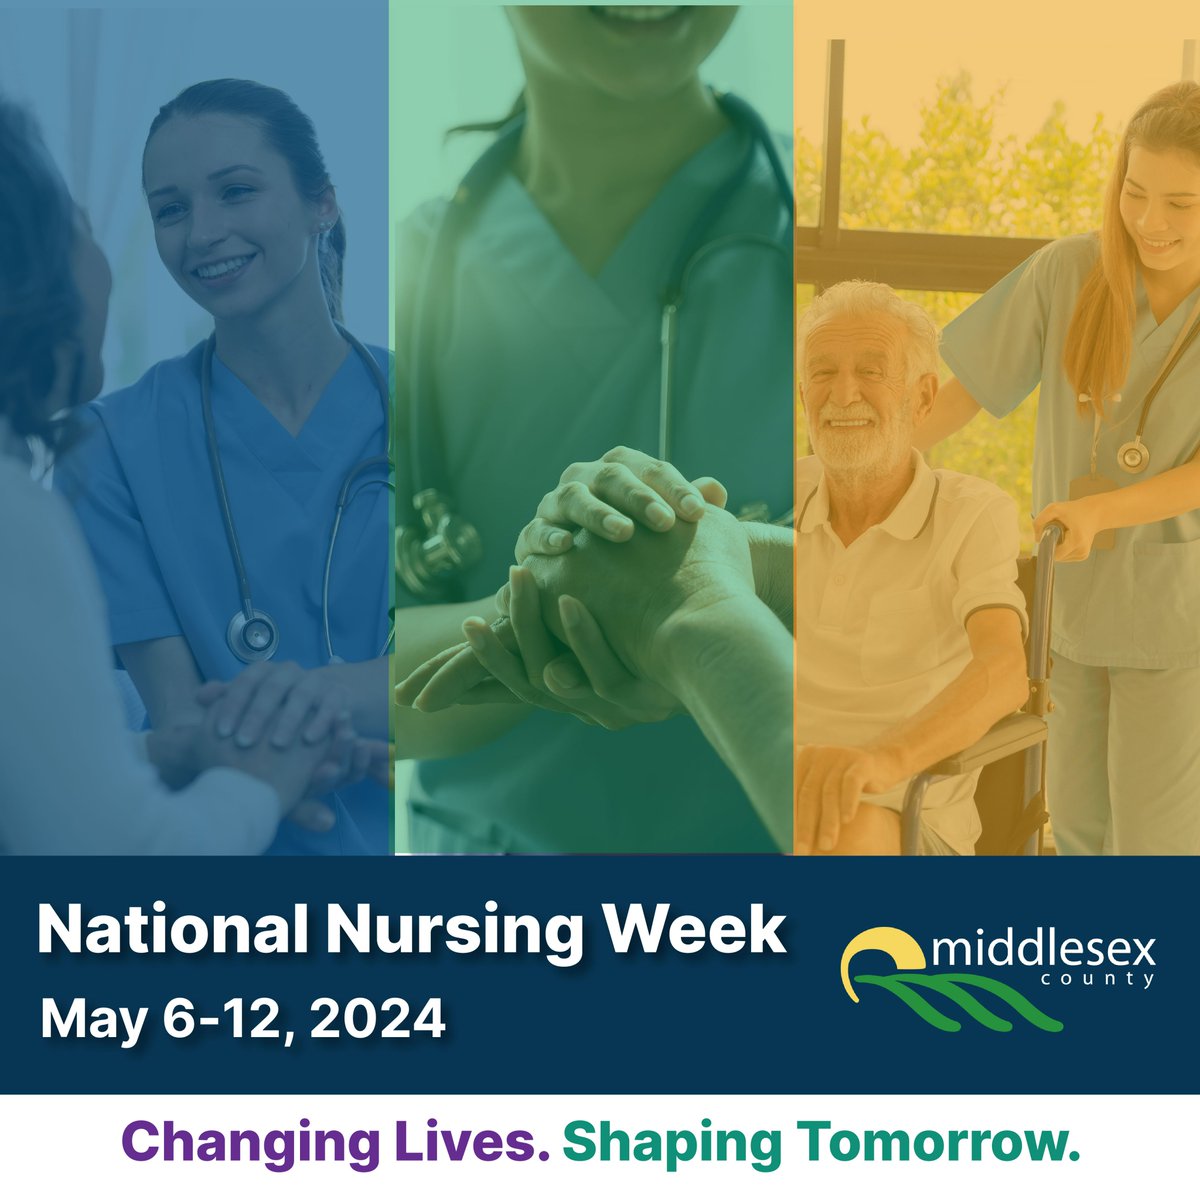 👩‍⚕️ National #NursingWeek is May 6-12, 2024, and this year’s theme is Changing Lives. Shaping Tomorrow. Middlesex County would like to thank our incredible nurses throughout the region especially the nurses at Strathmere Lodge!🩺💙